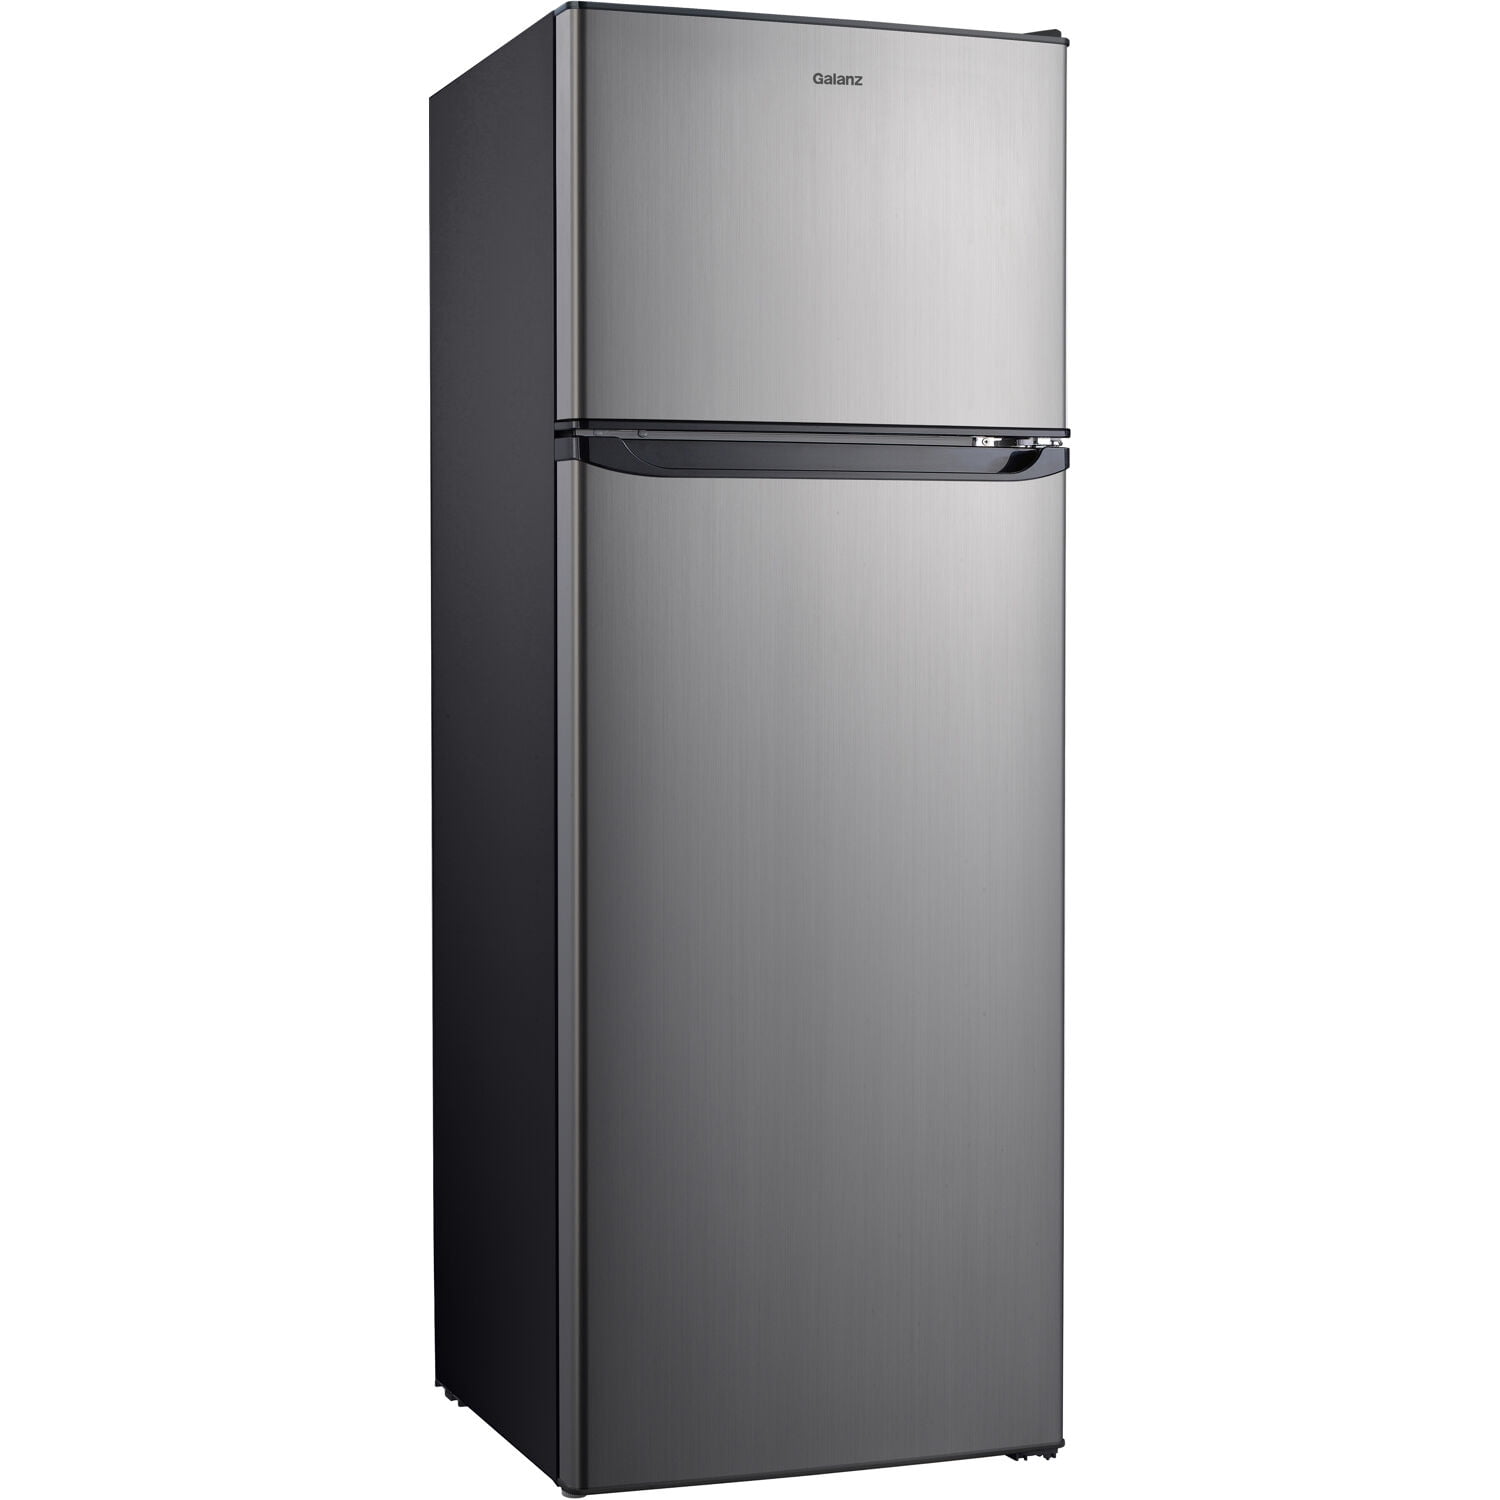 Photo 1 of Galanz GLR12TS5F Refrigerator, Dual Door Fridge, ** TOP CORNER DENTED, STENCH FROM INSIDE. Adjustable Electrical Thermostat Control with Top Mount Freezer Compartment, 12.0 Cu.Ft, Stainless Steel
